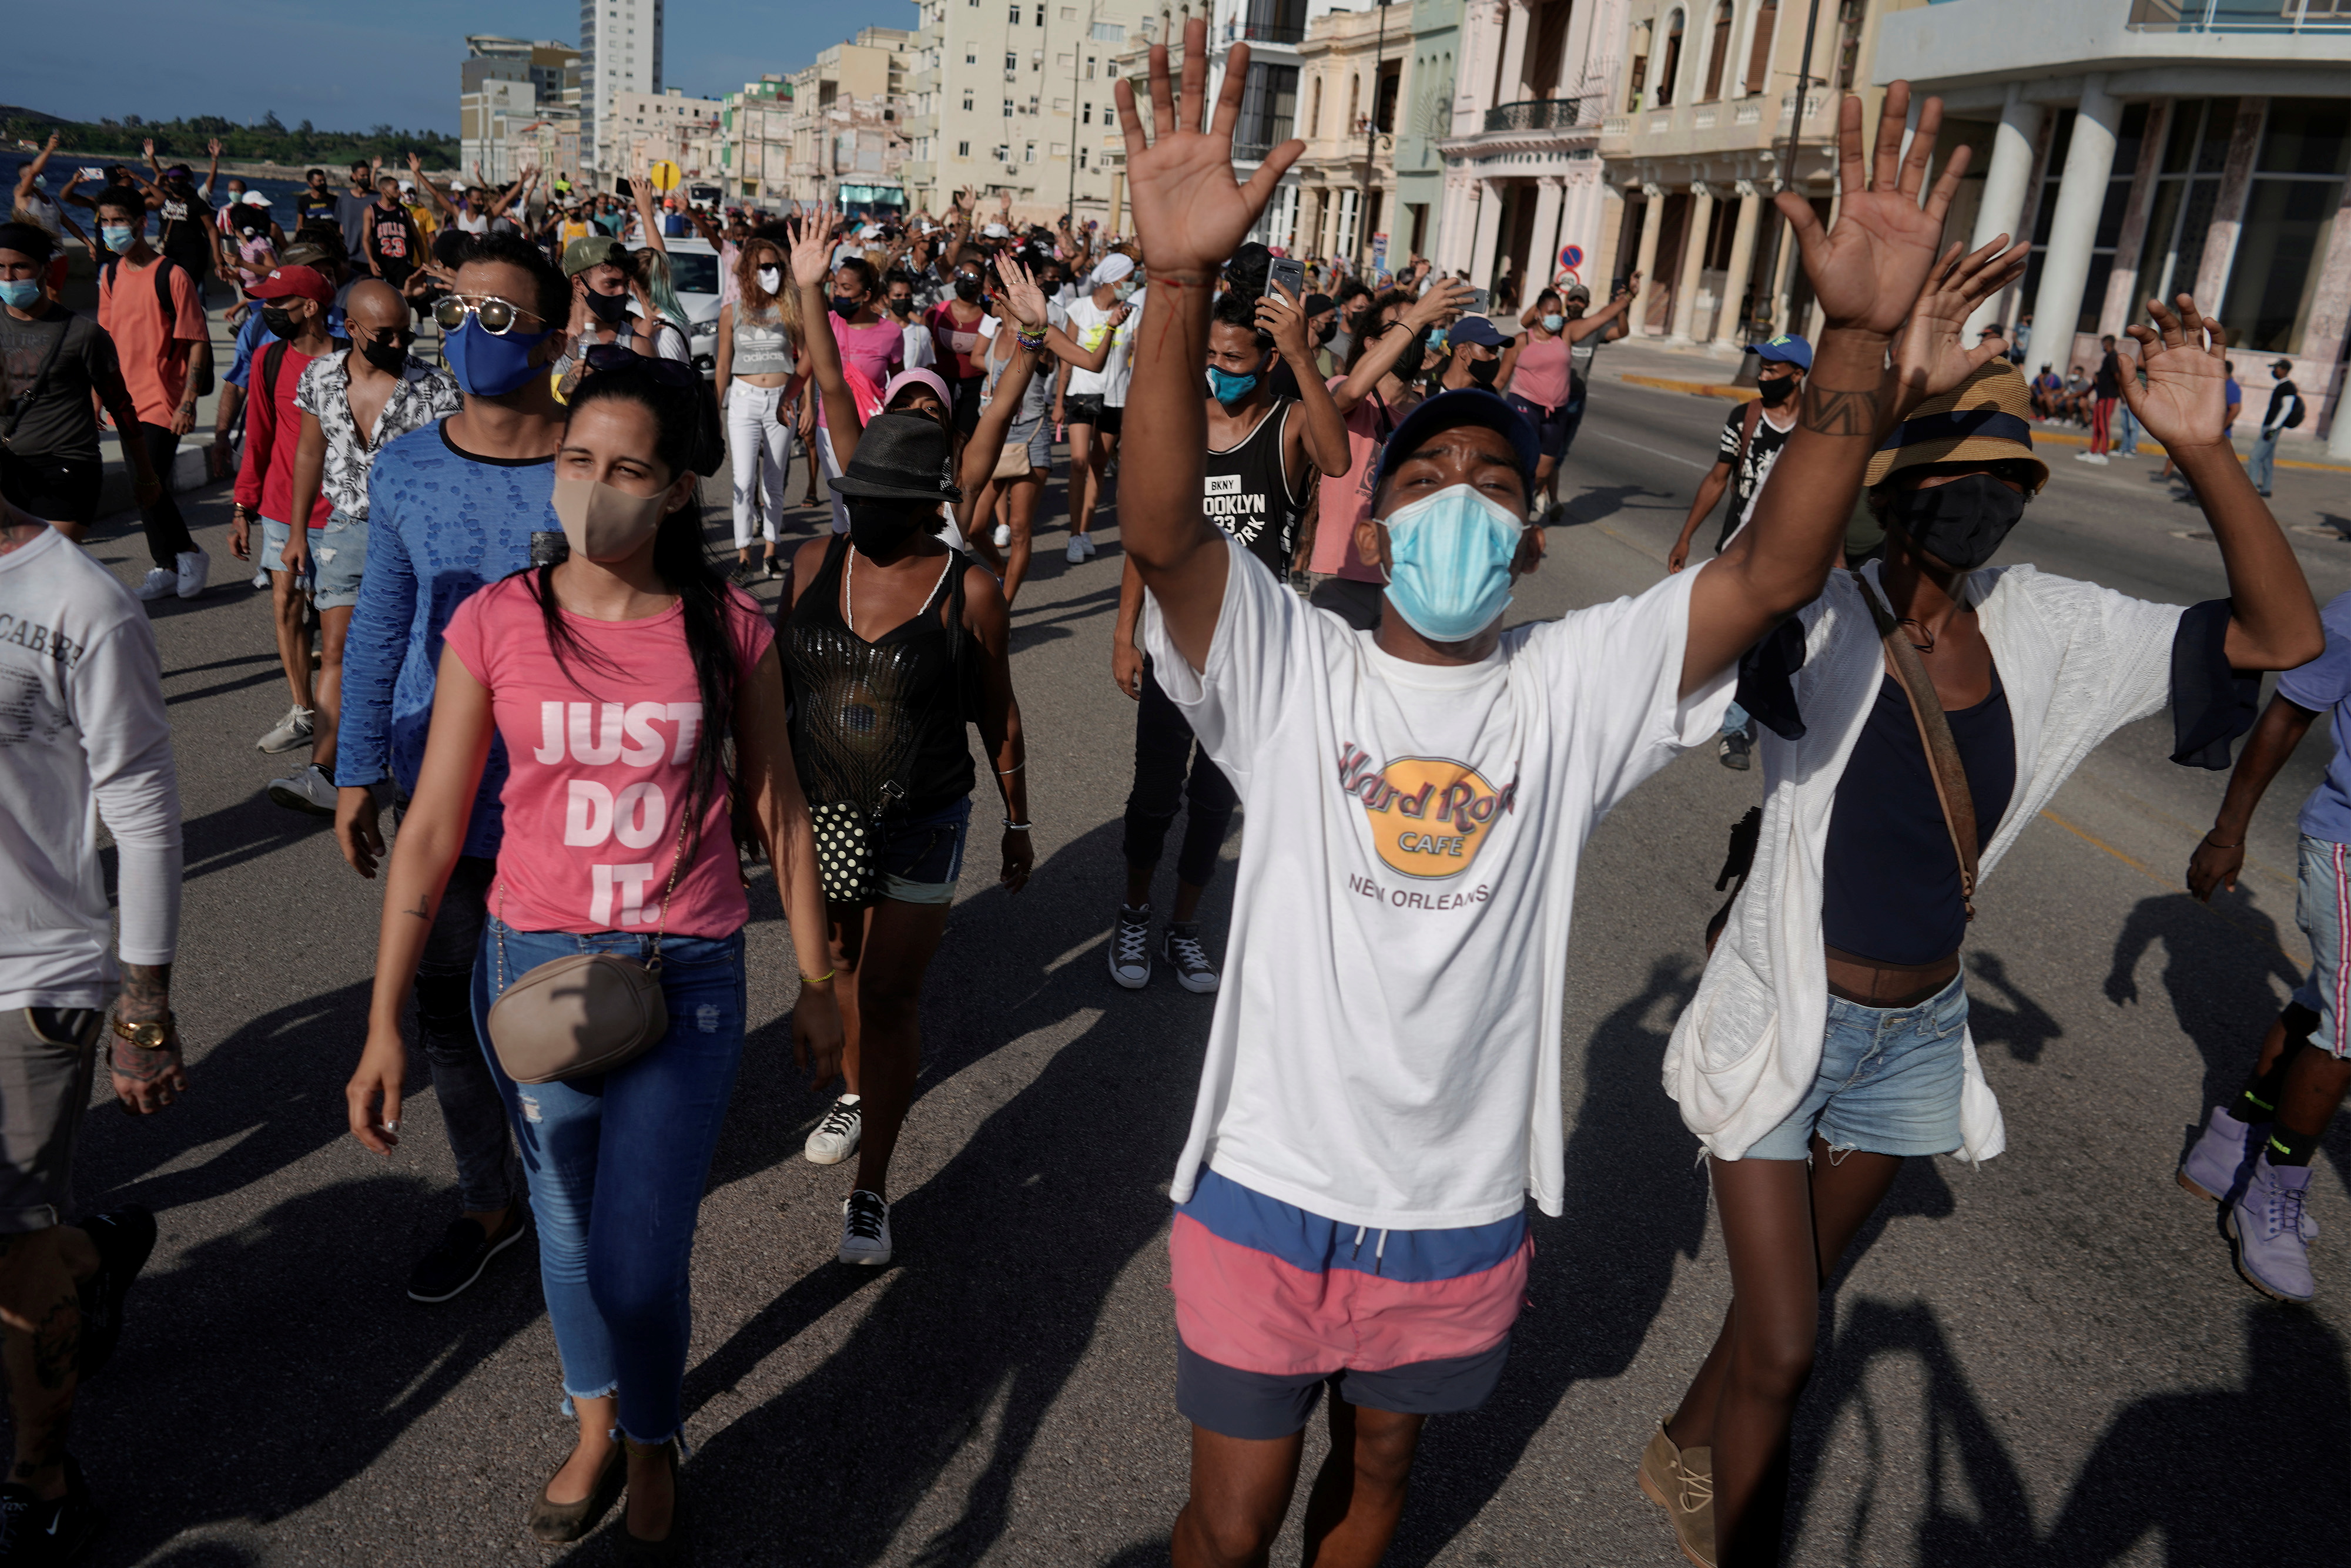 People shout slogans against the government during a protest in Havana